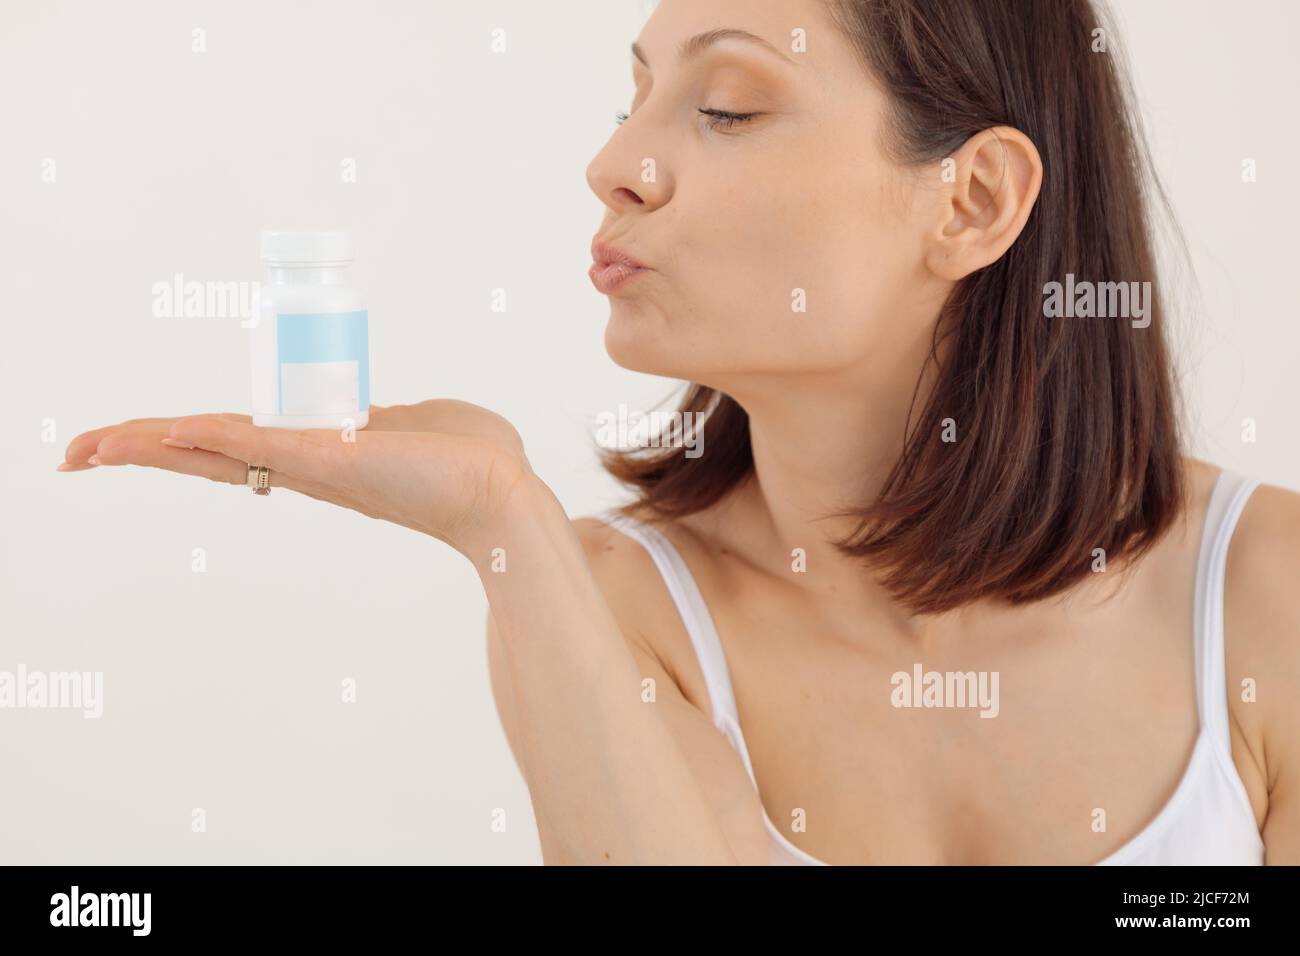 Portrait of young woman with short dark hair wearing white top, holding blue plastic bottle of pills for womans health. Stock Photo